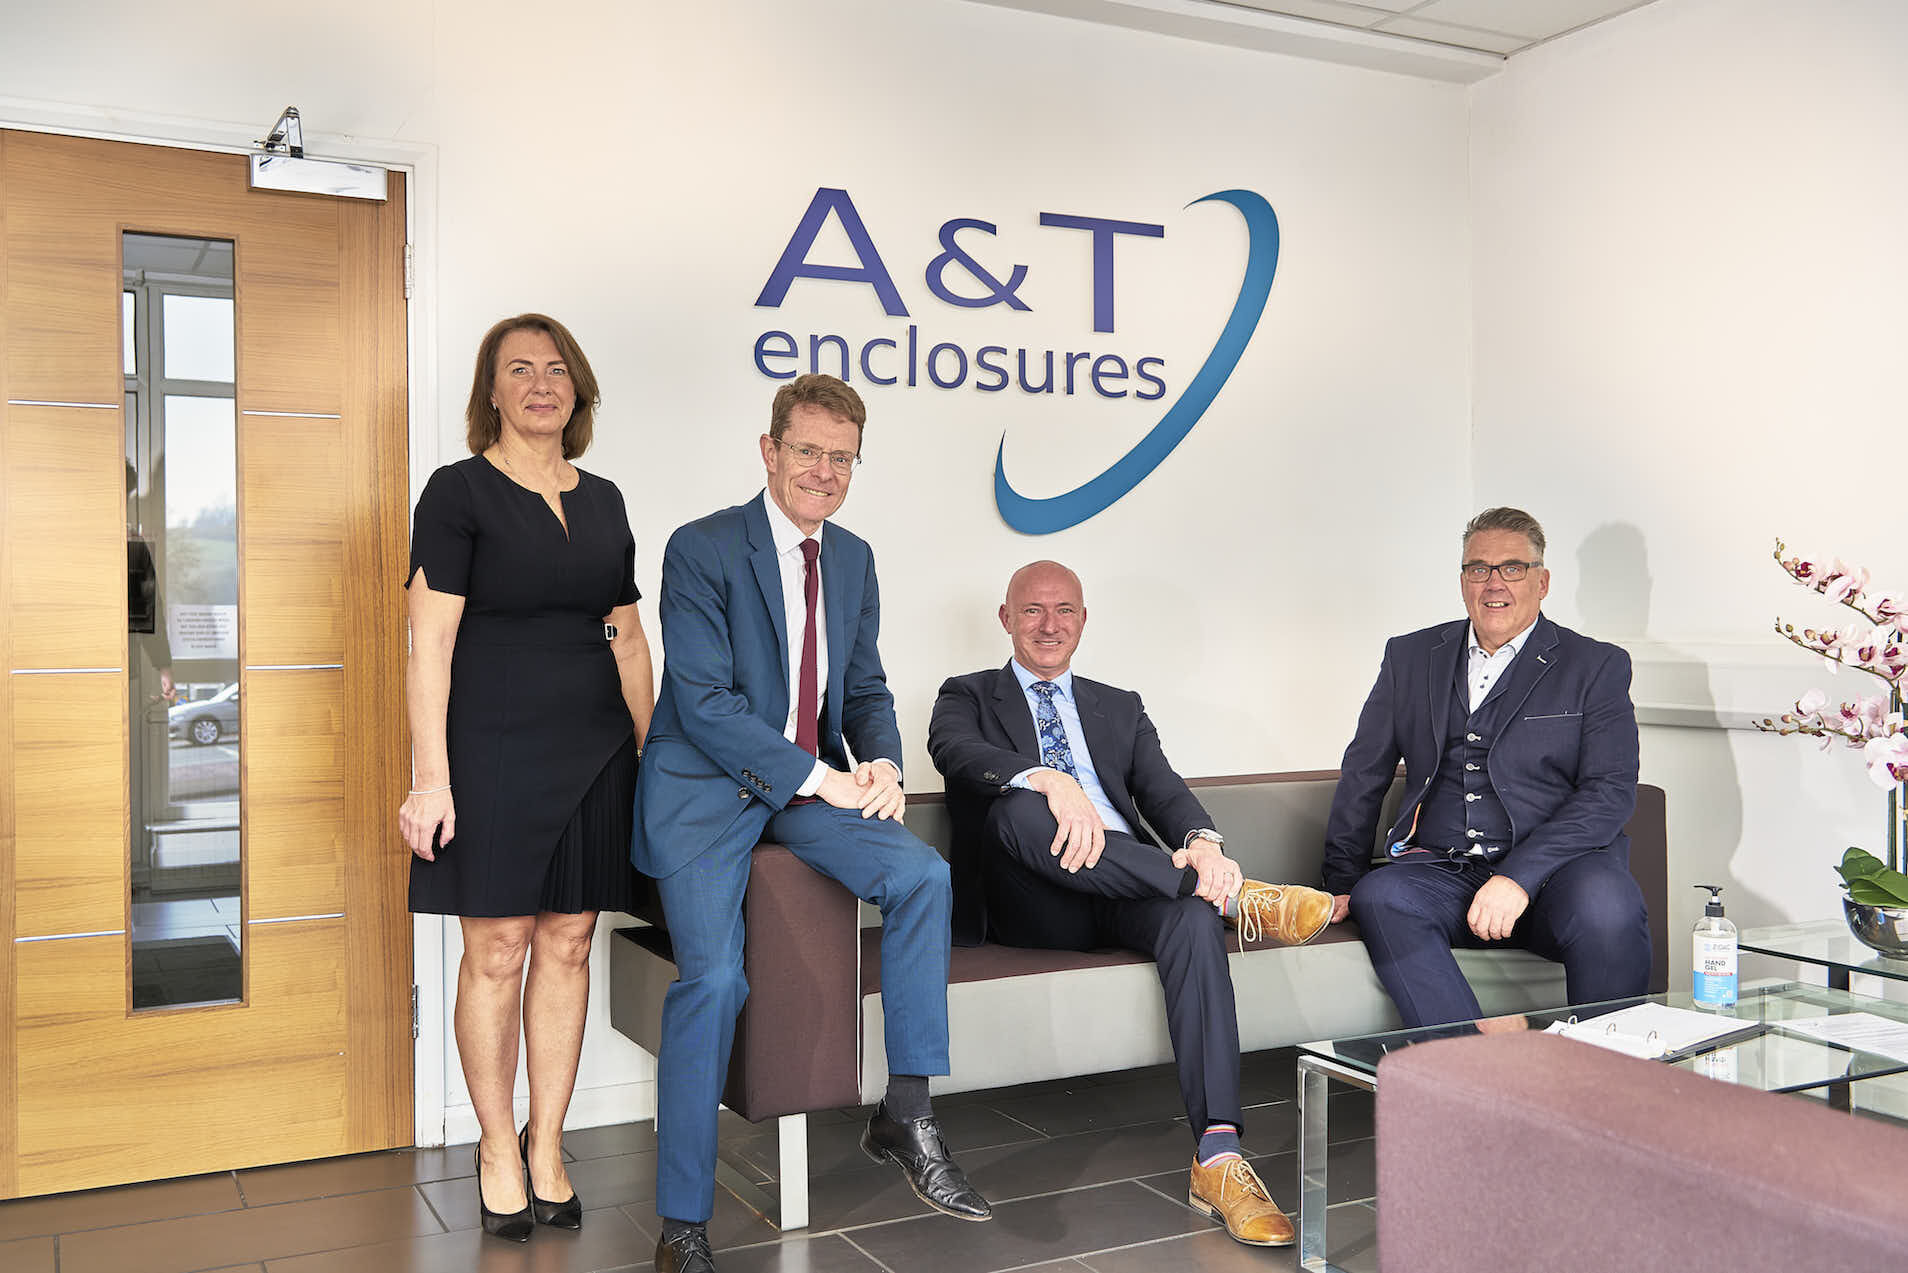 Andy Street CBE, Mayor of the West Midlands, visits A&T Enclosures to celebrate 30 years in business